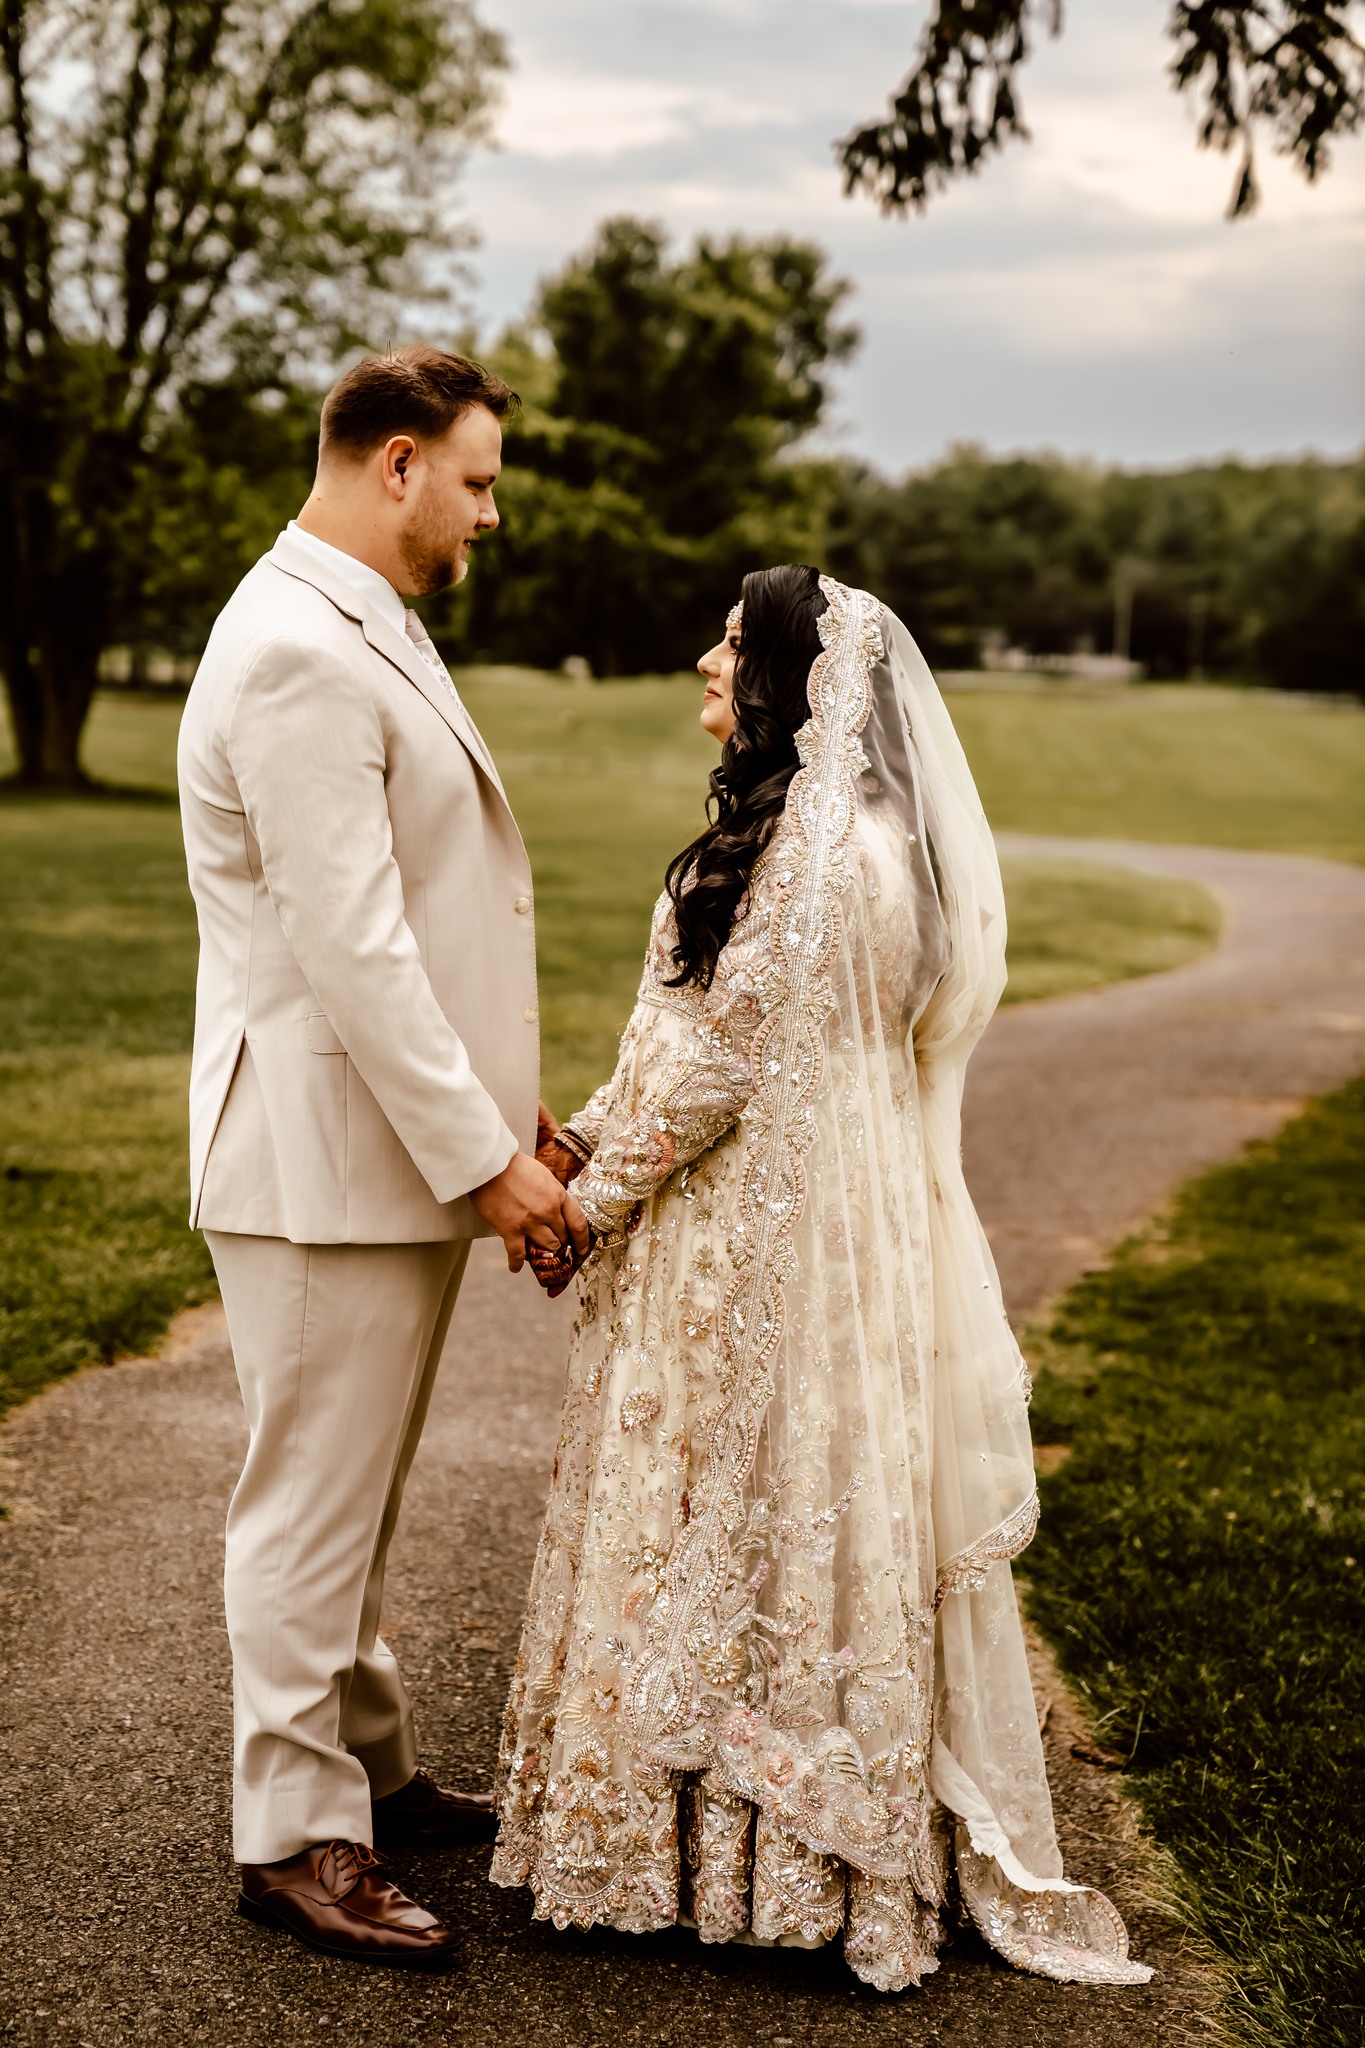 A bride and groom in a park holding hands and facing each other